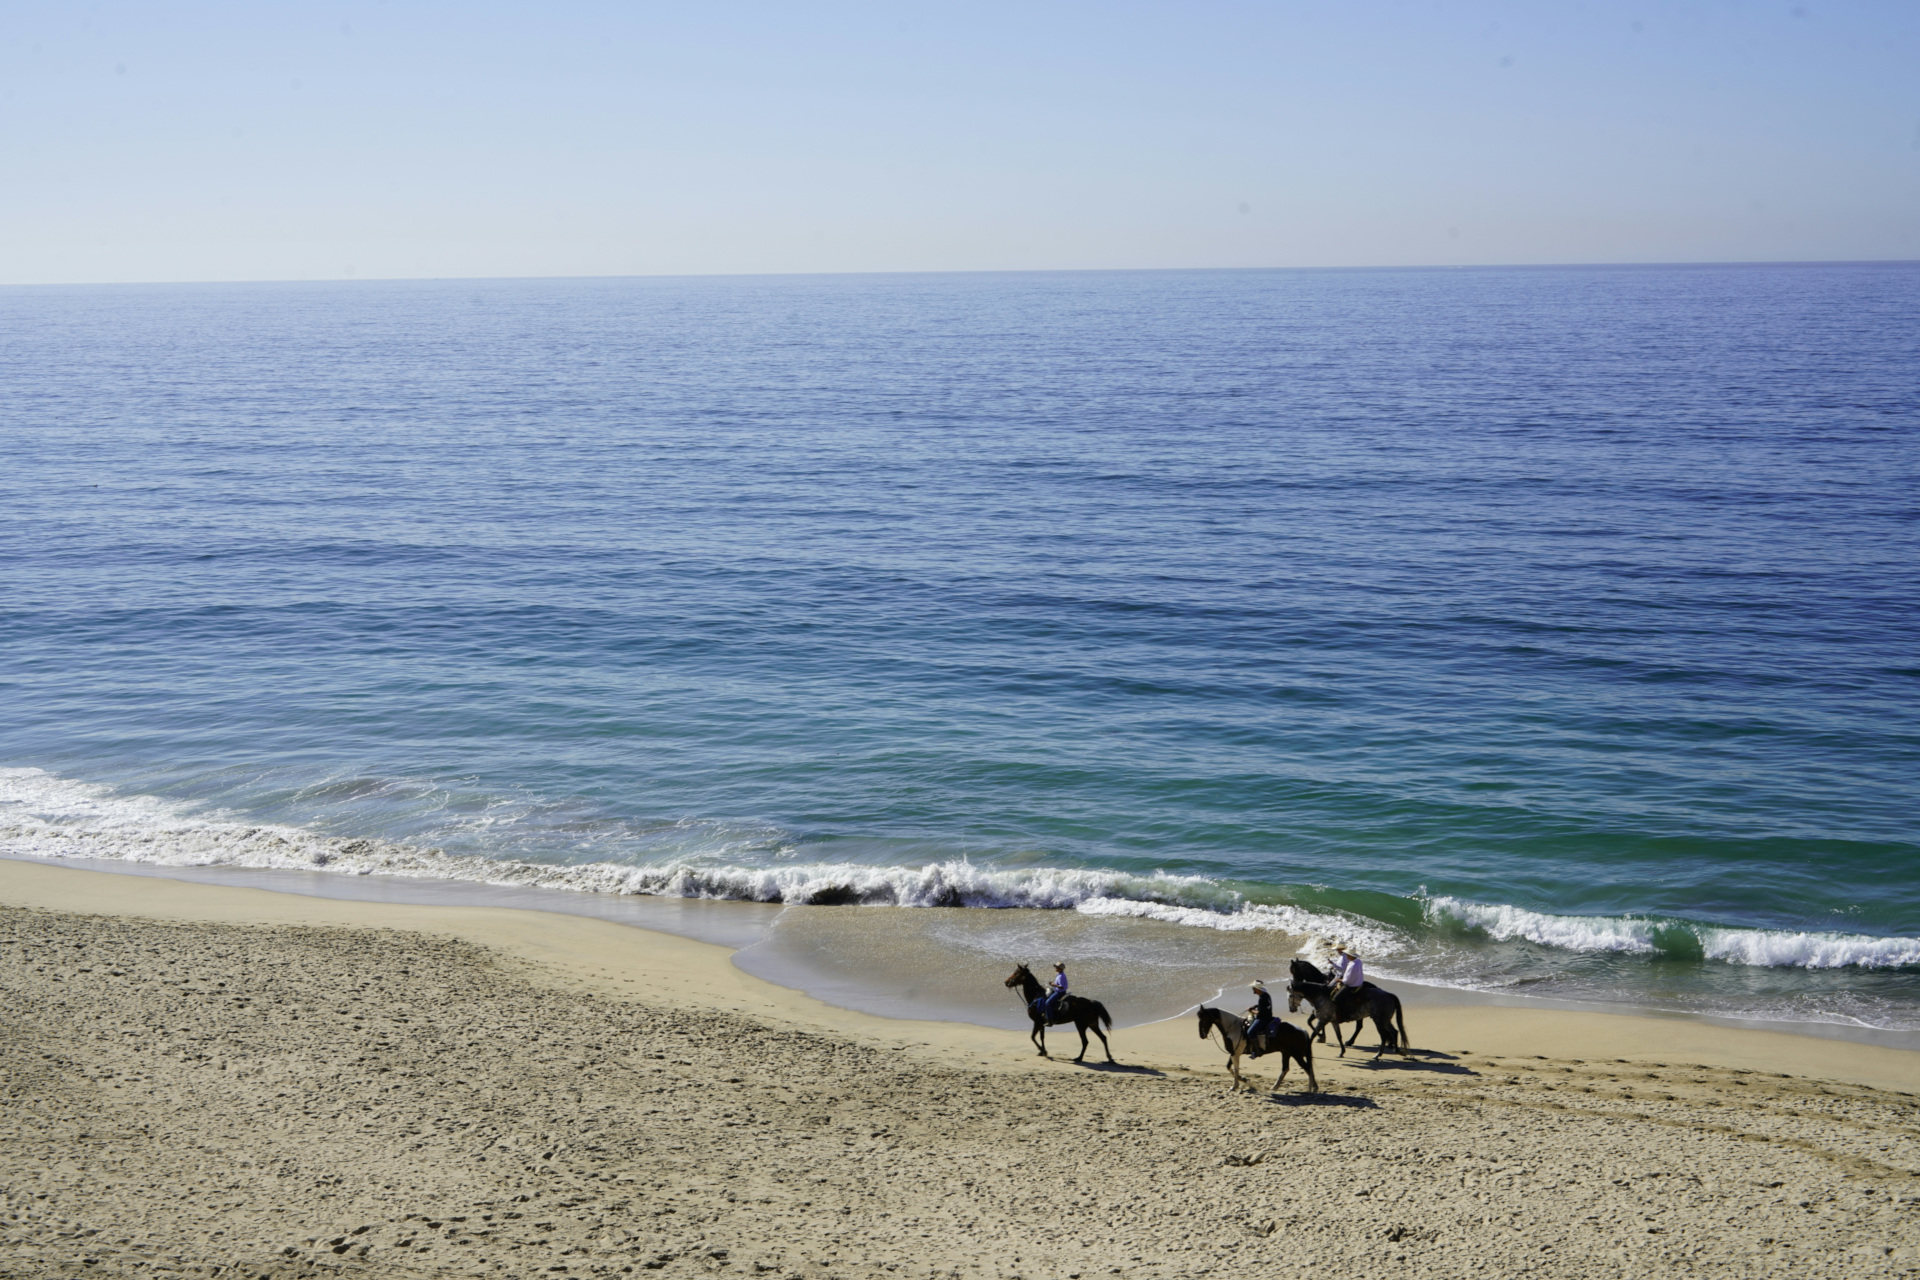 People horse riding on beach